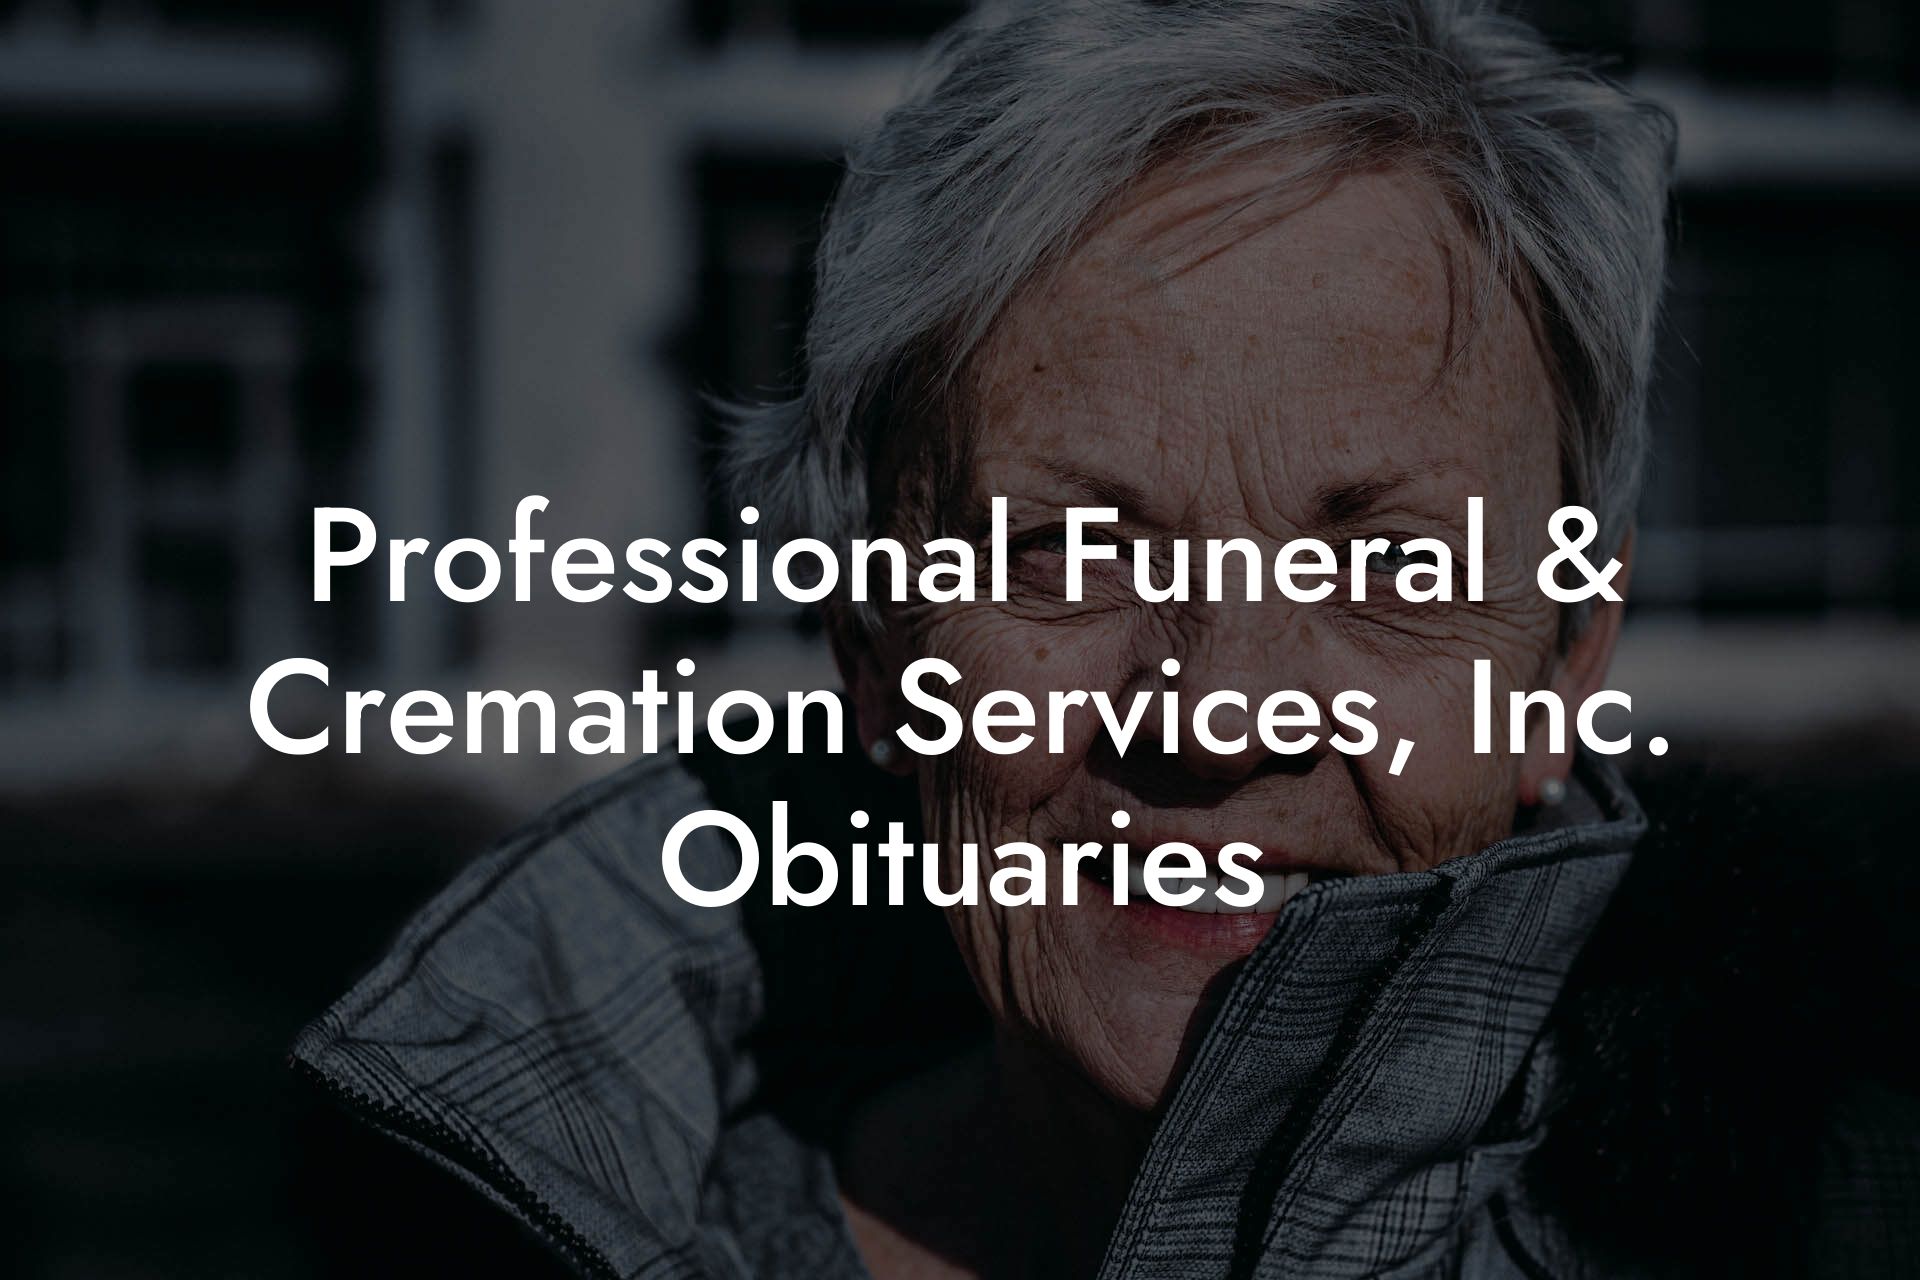 Professional Funeral & Cremation Services, Inc. Obituaries